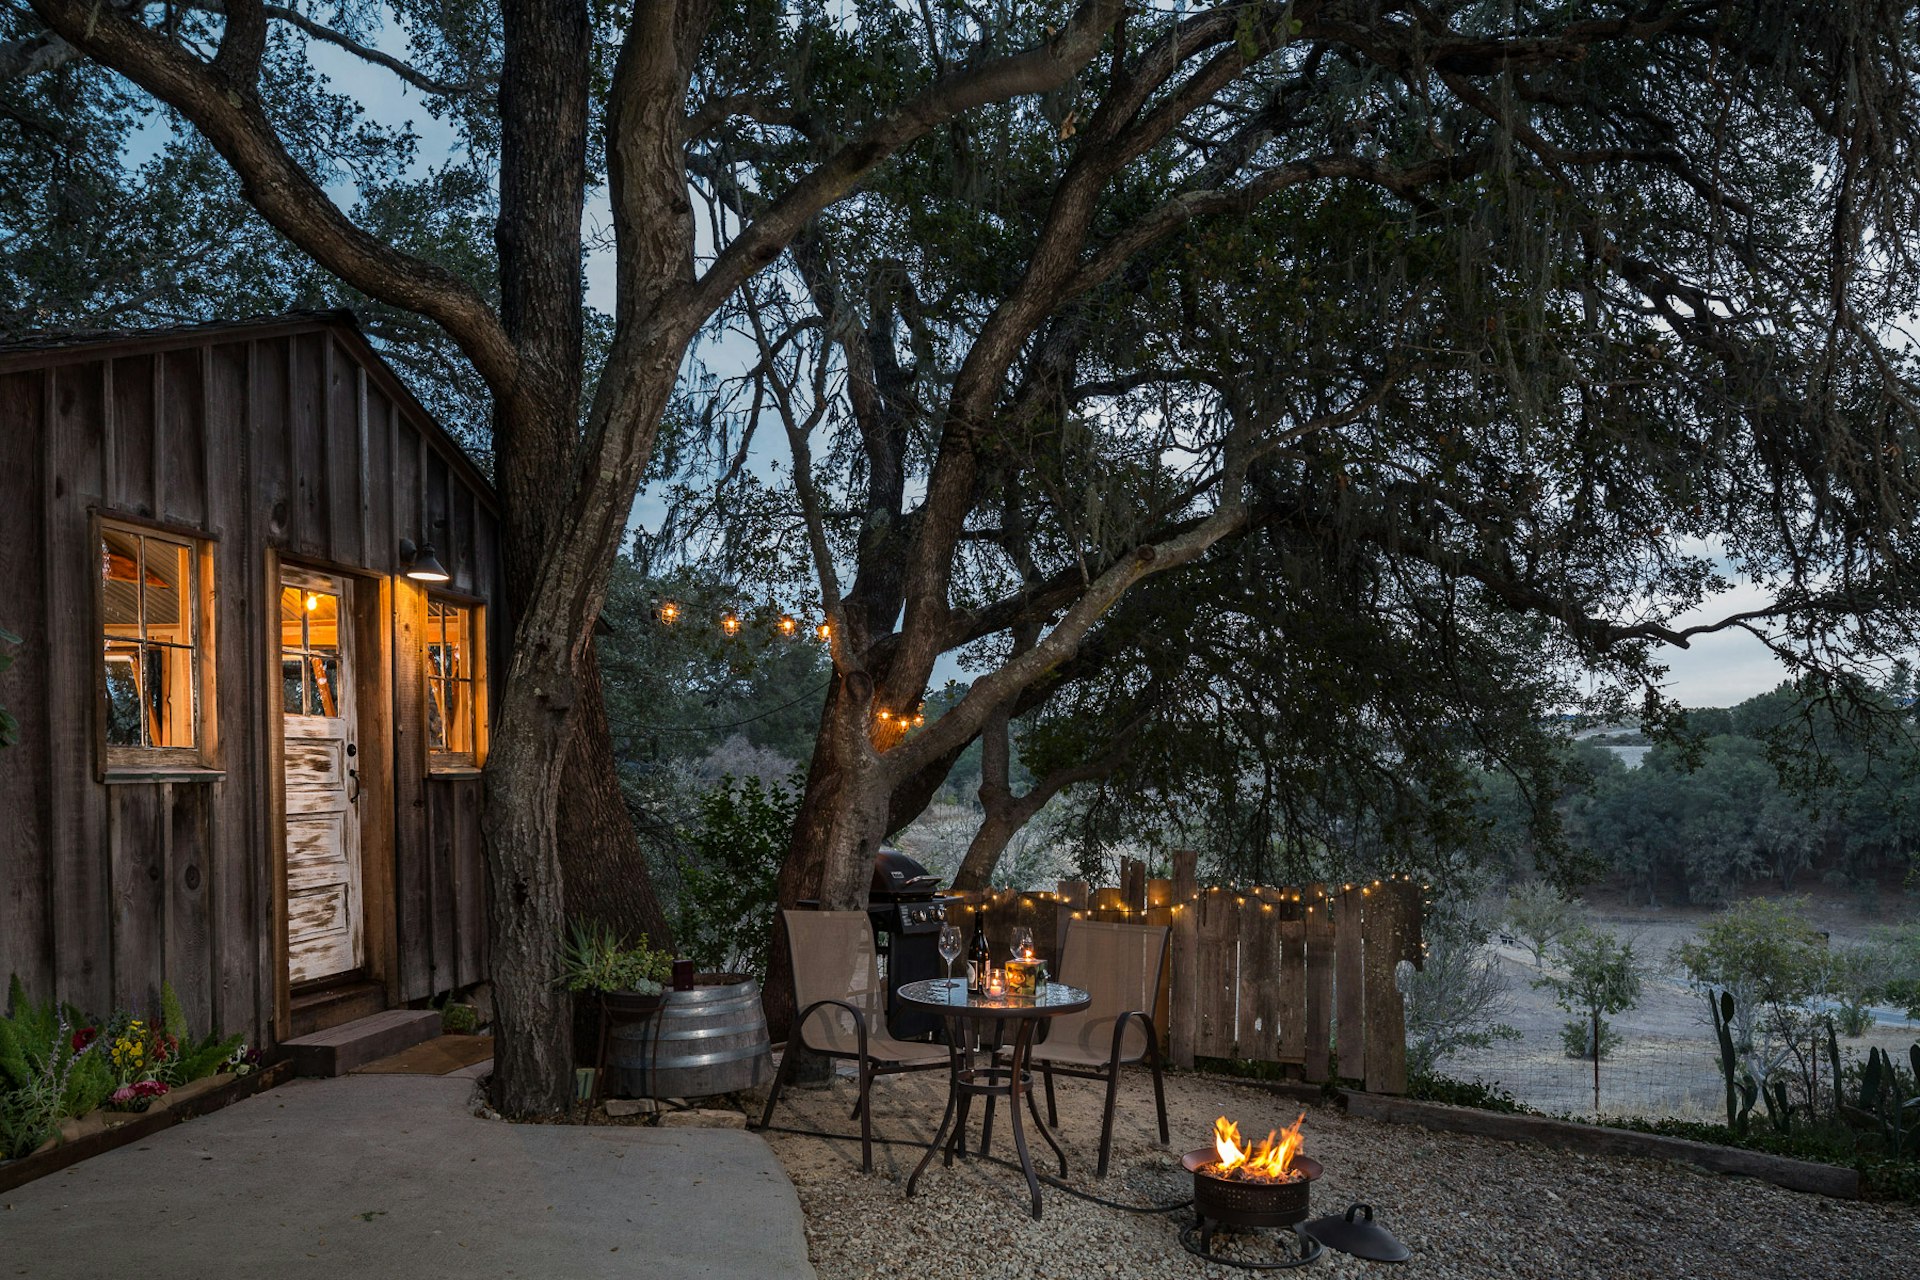 A cabin at dusk, lit from within, with a small bistro table, a firepit, and a fence with twinkle lights